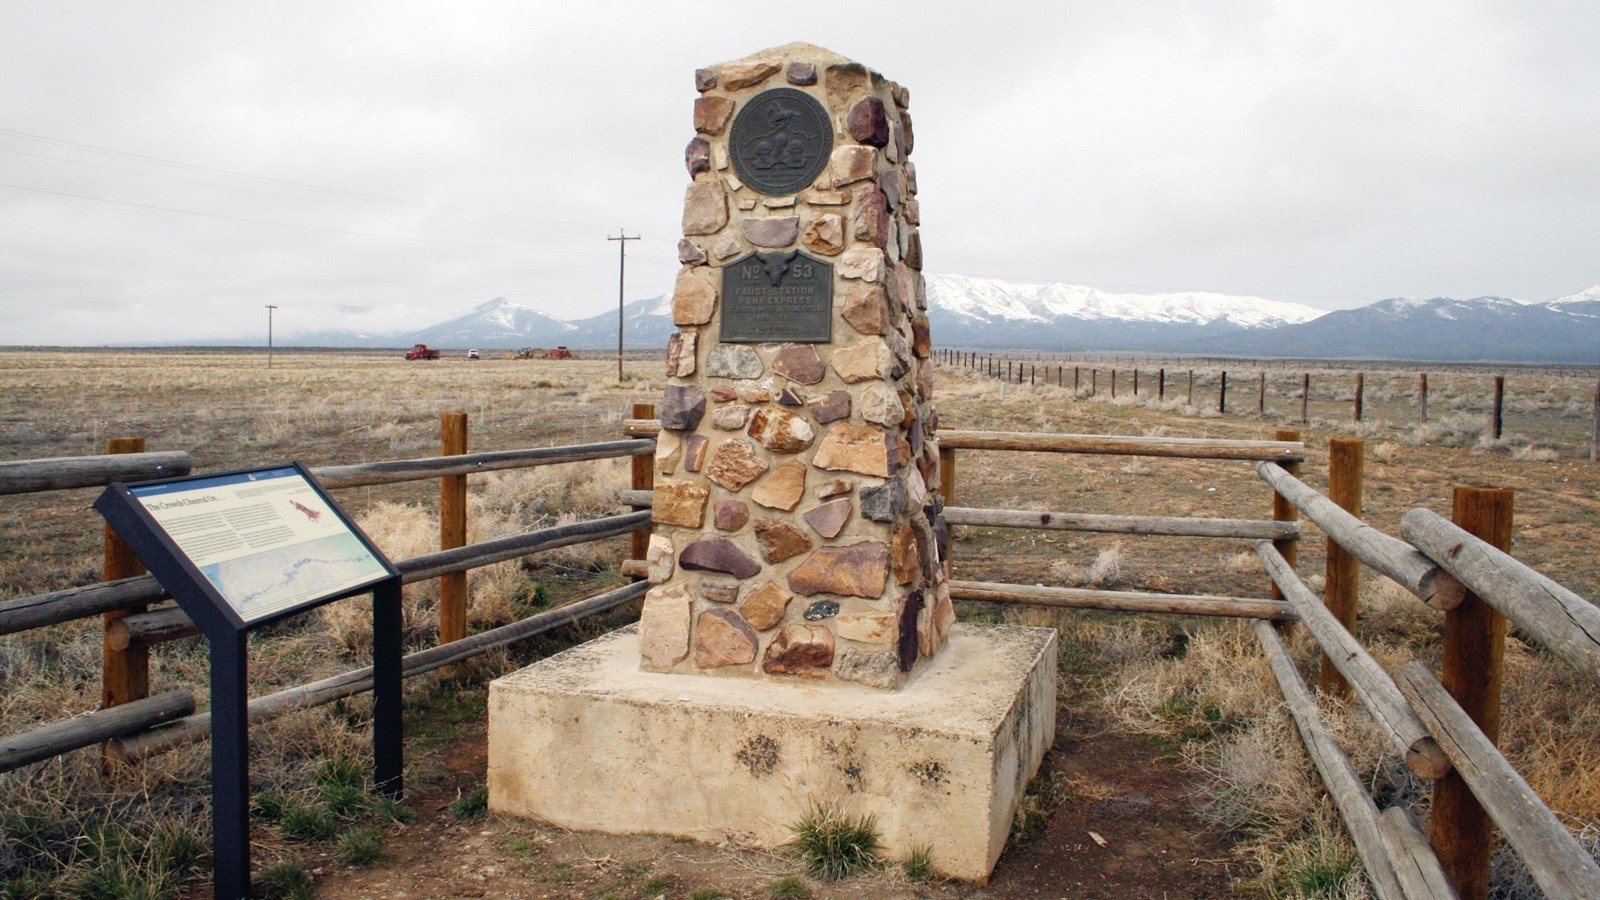 A stone monument four or five feet tall stands next to an upright exhibit panel in a small fence.